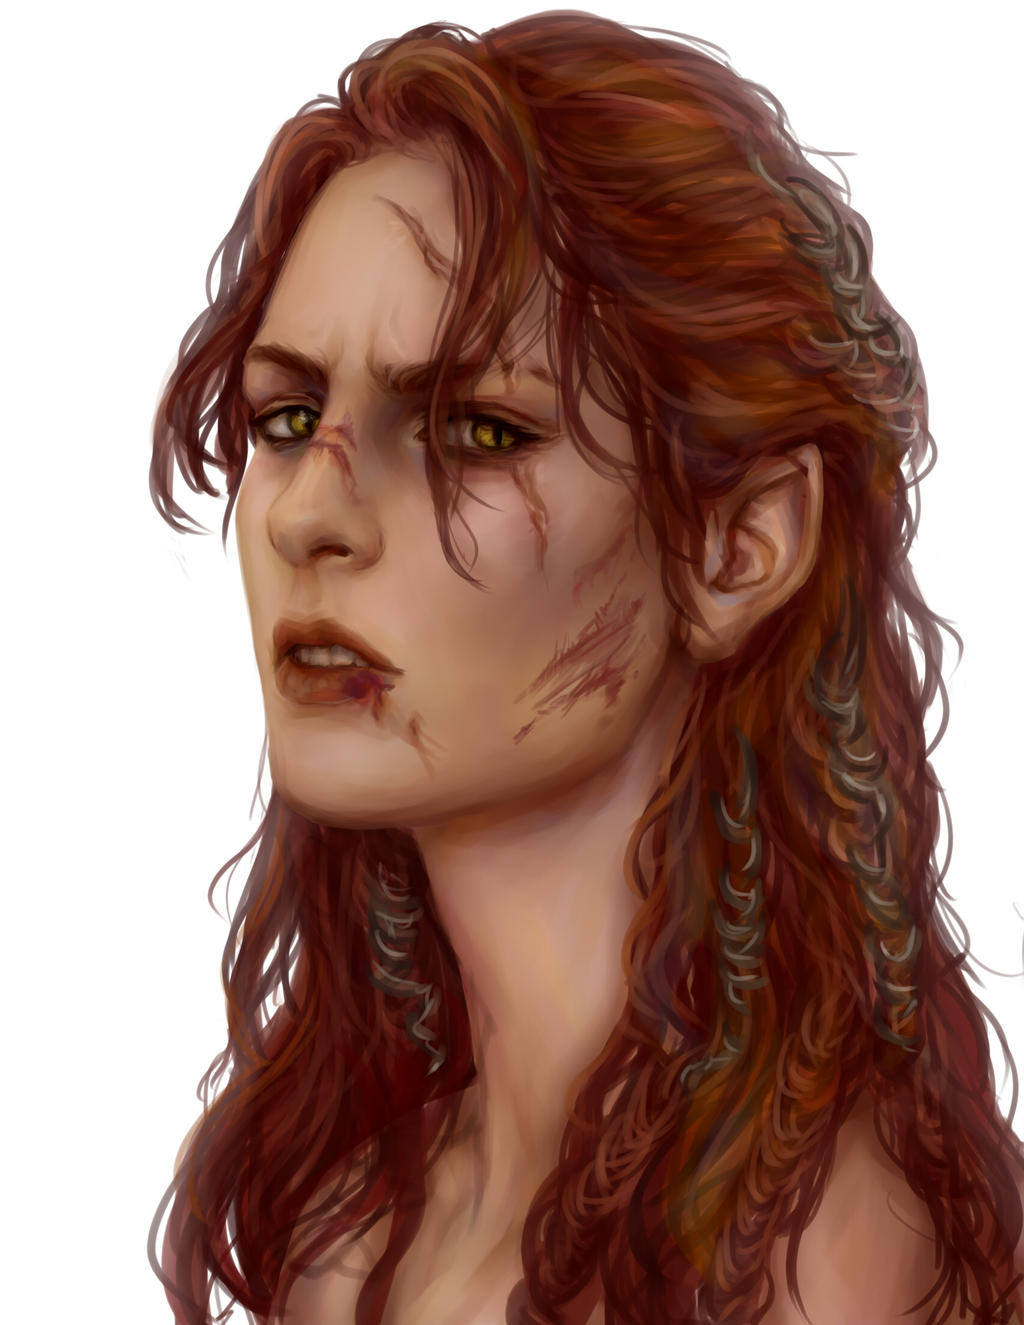 Rhona commission [2] by AnnaHelme on DeviantArt